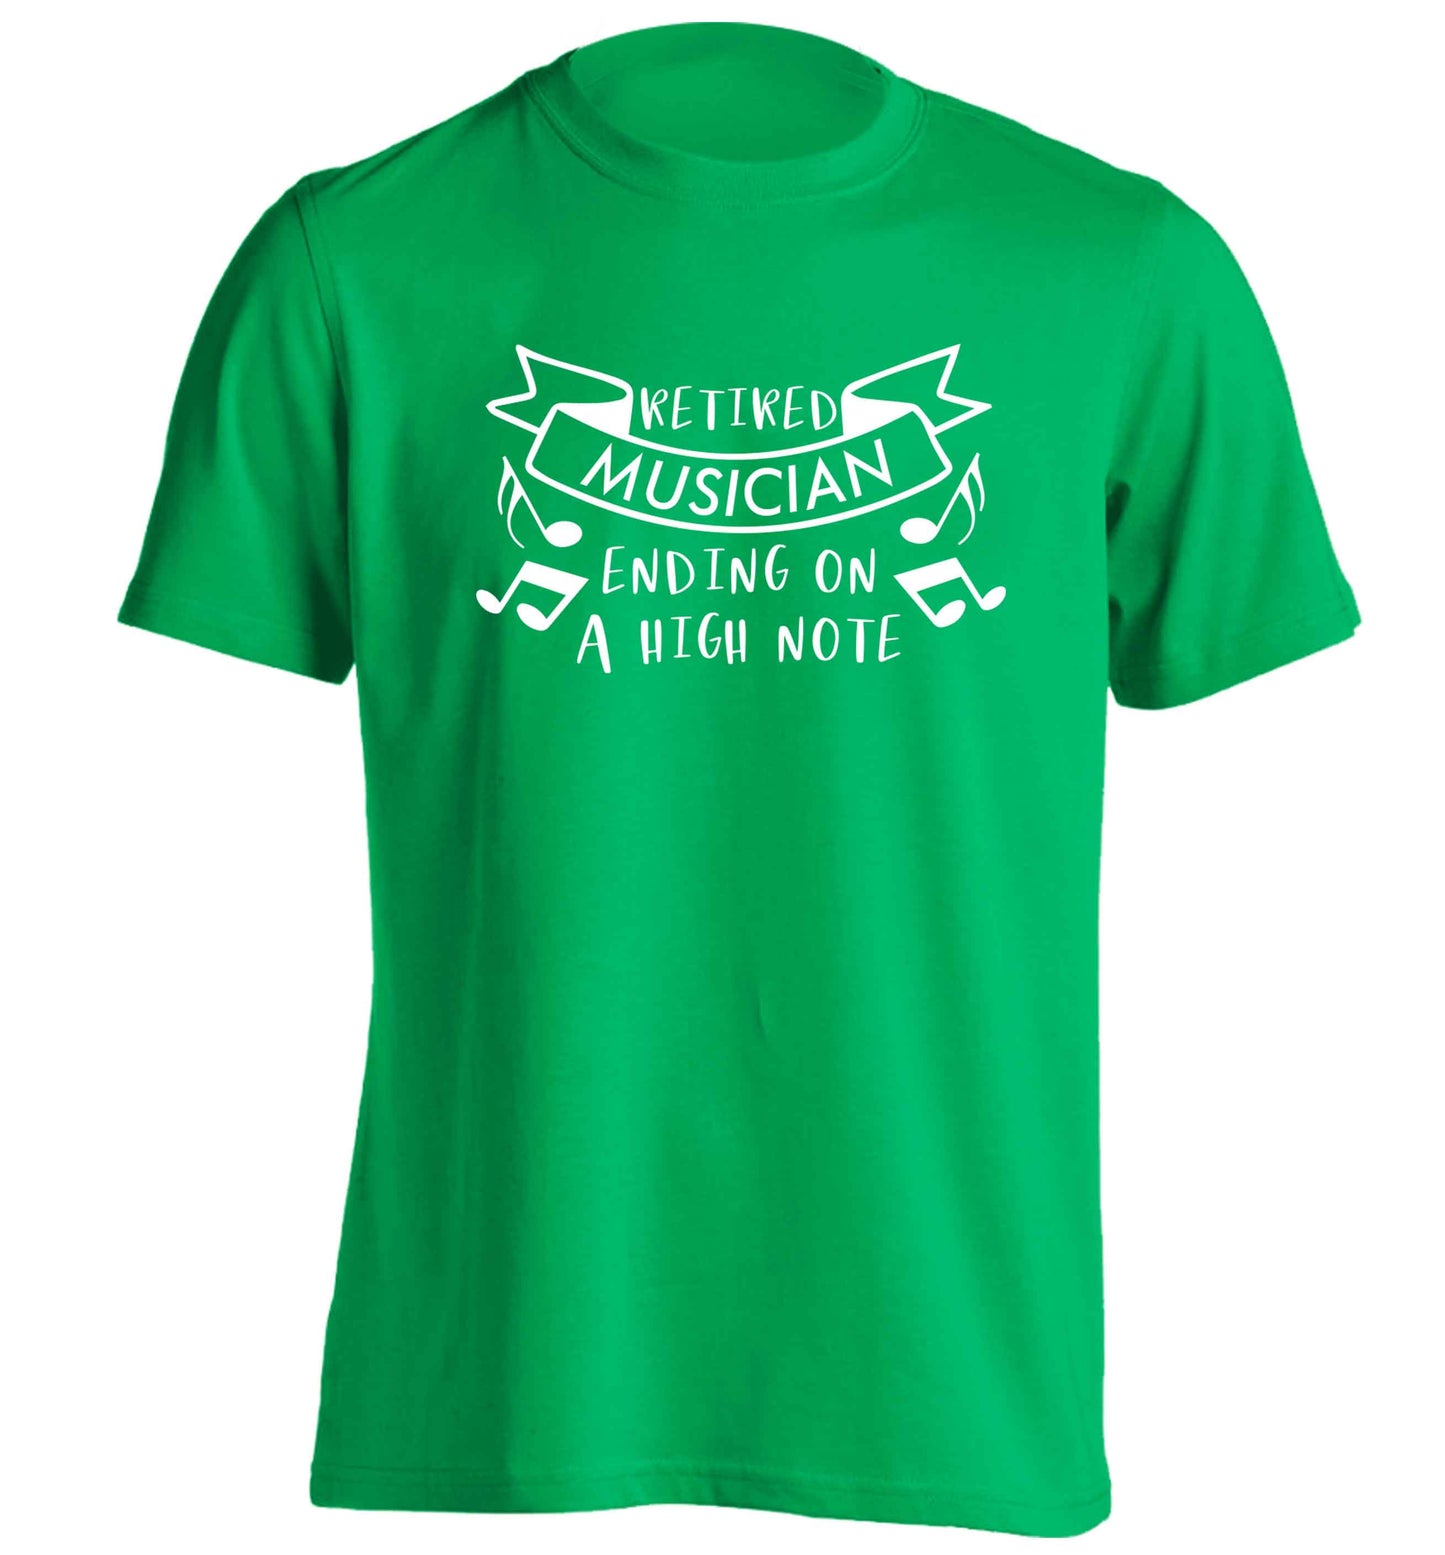 Retired musician ending on a high note adults unisex green Tshirt 2XL